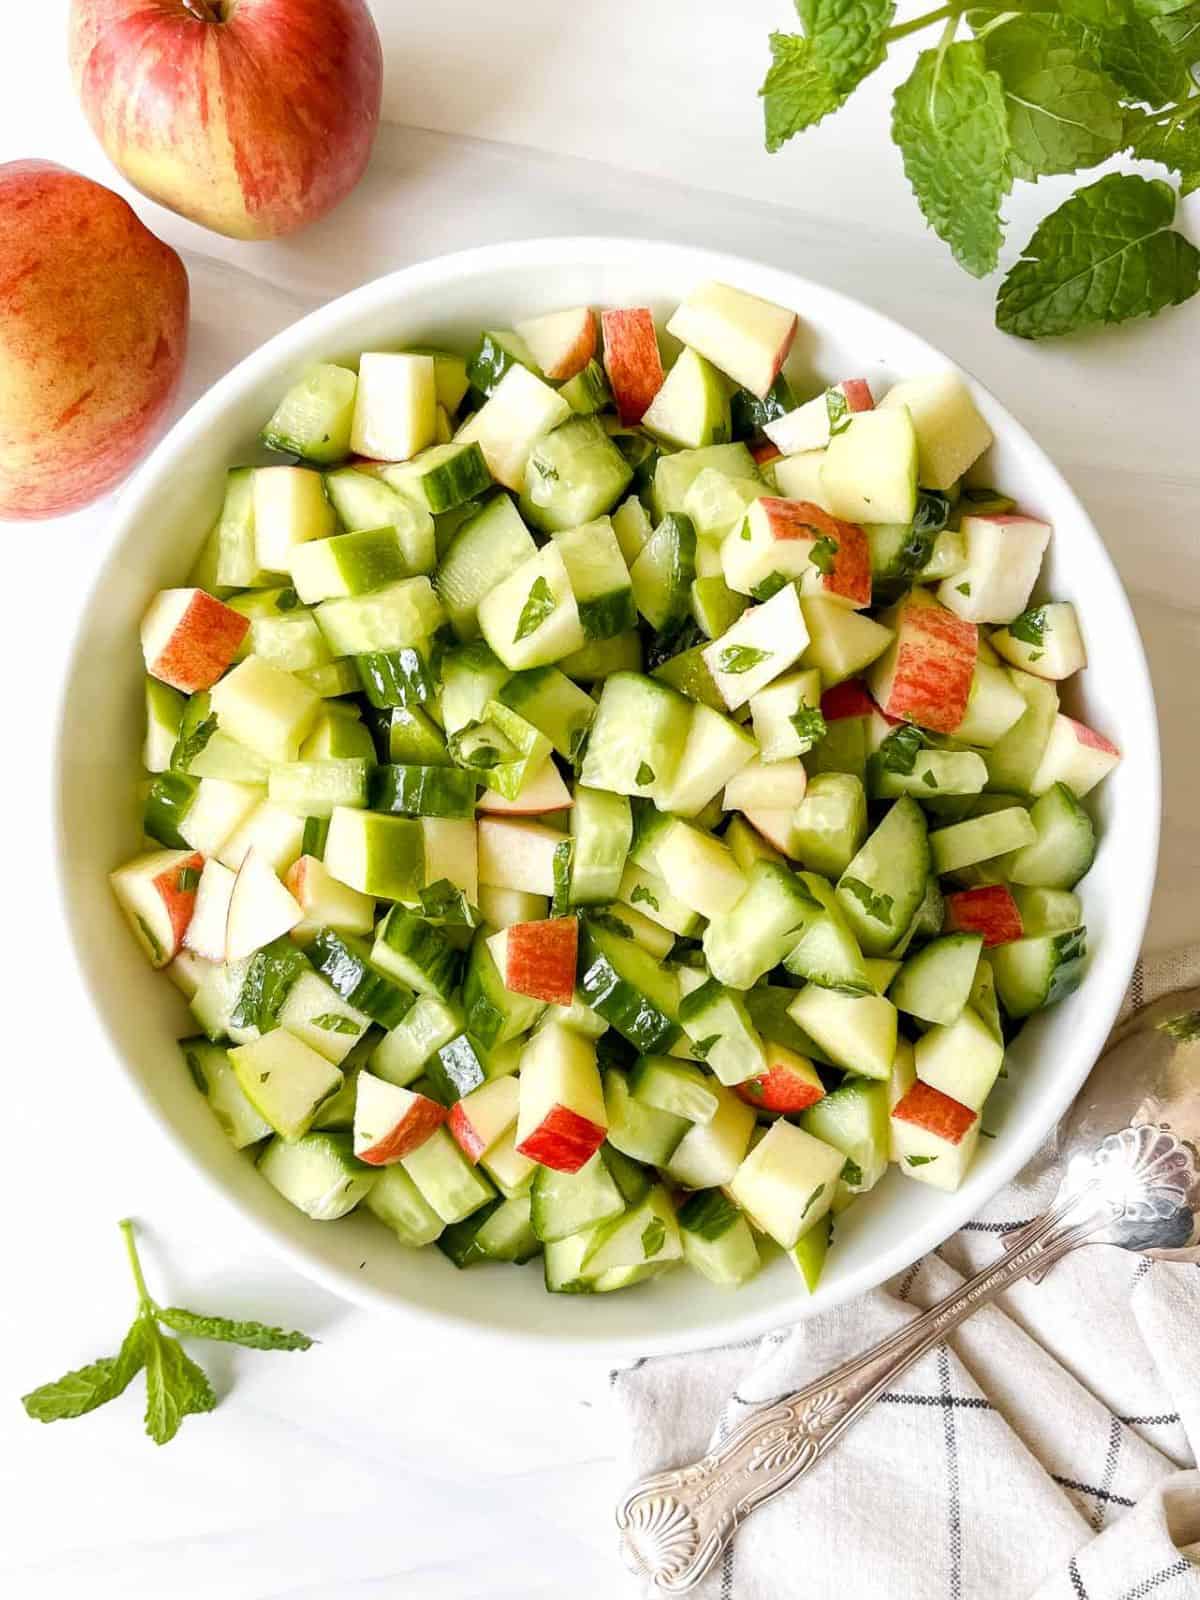 apple and cucumber salad in a white bowl next to a spoon, red apple and mint leaves.